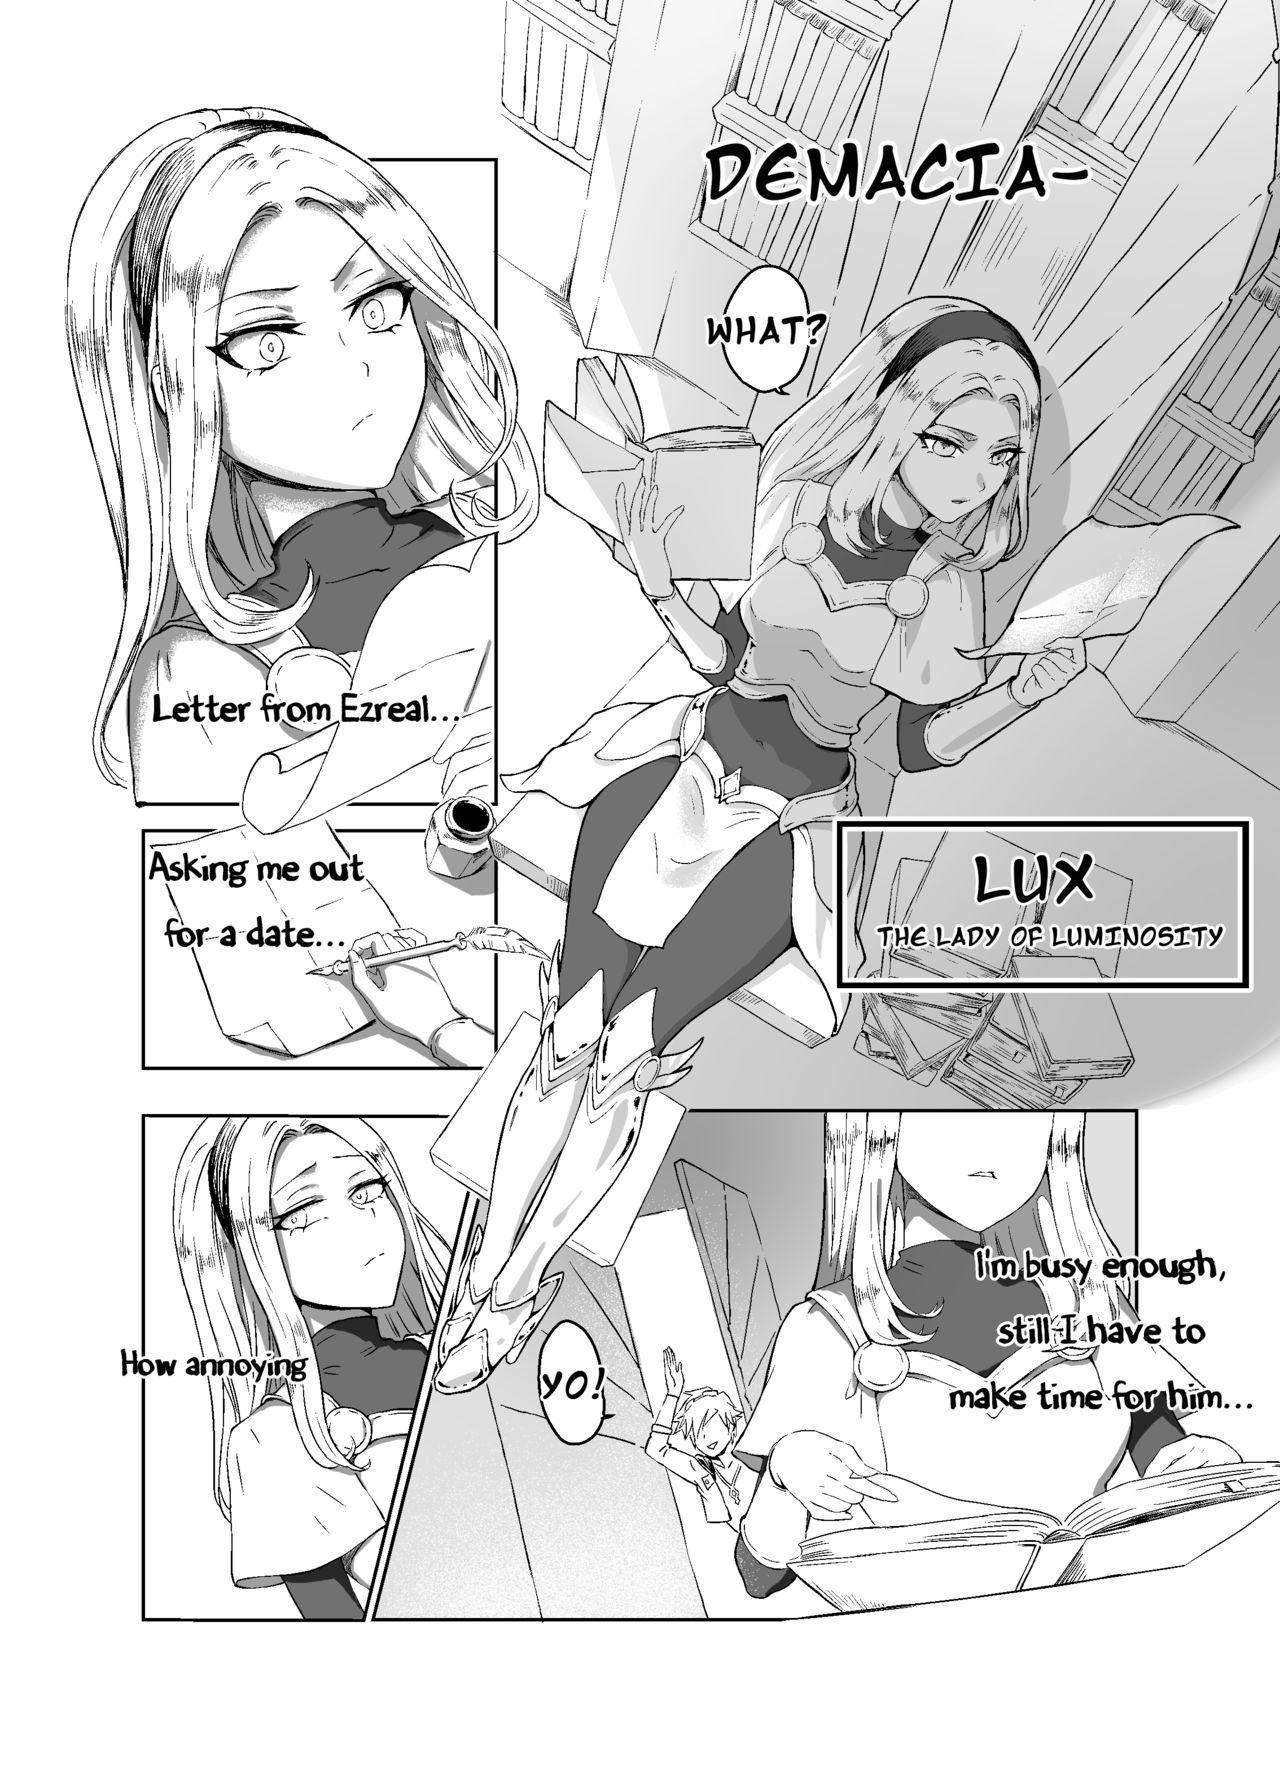 Hot Chicks Fucking Lux x Viego ft. Ezreal - League of legends Tinder - Page 2